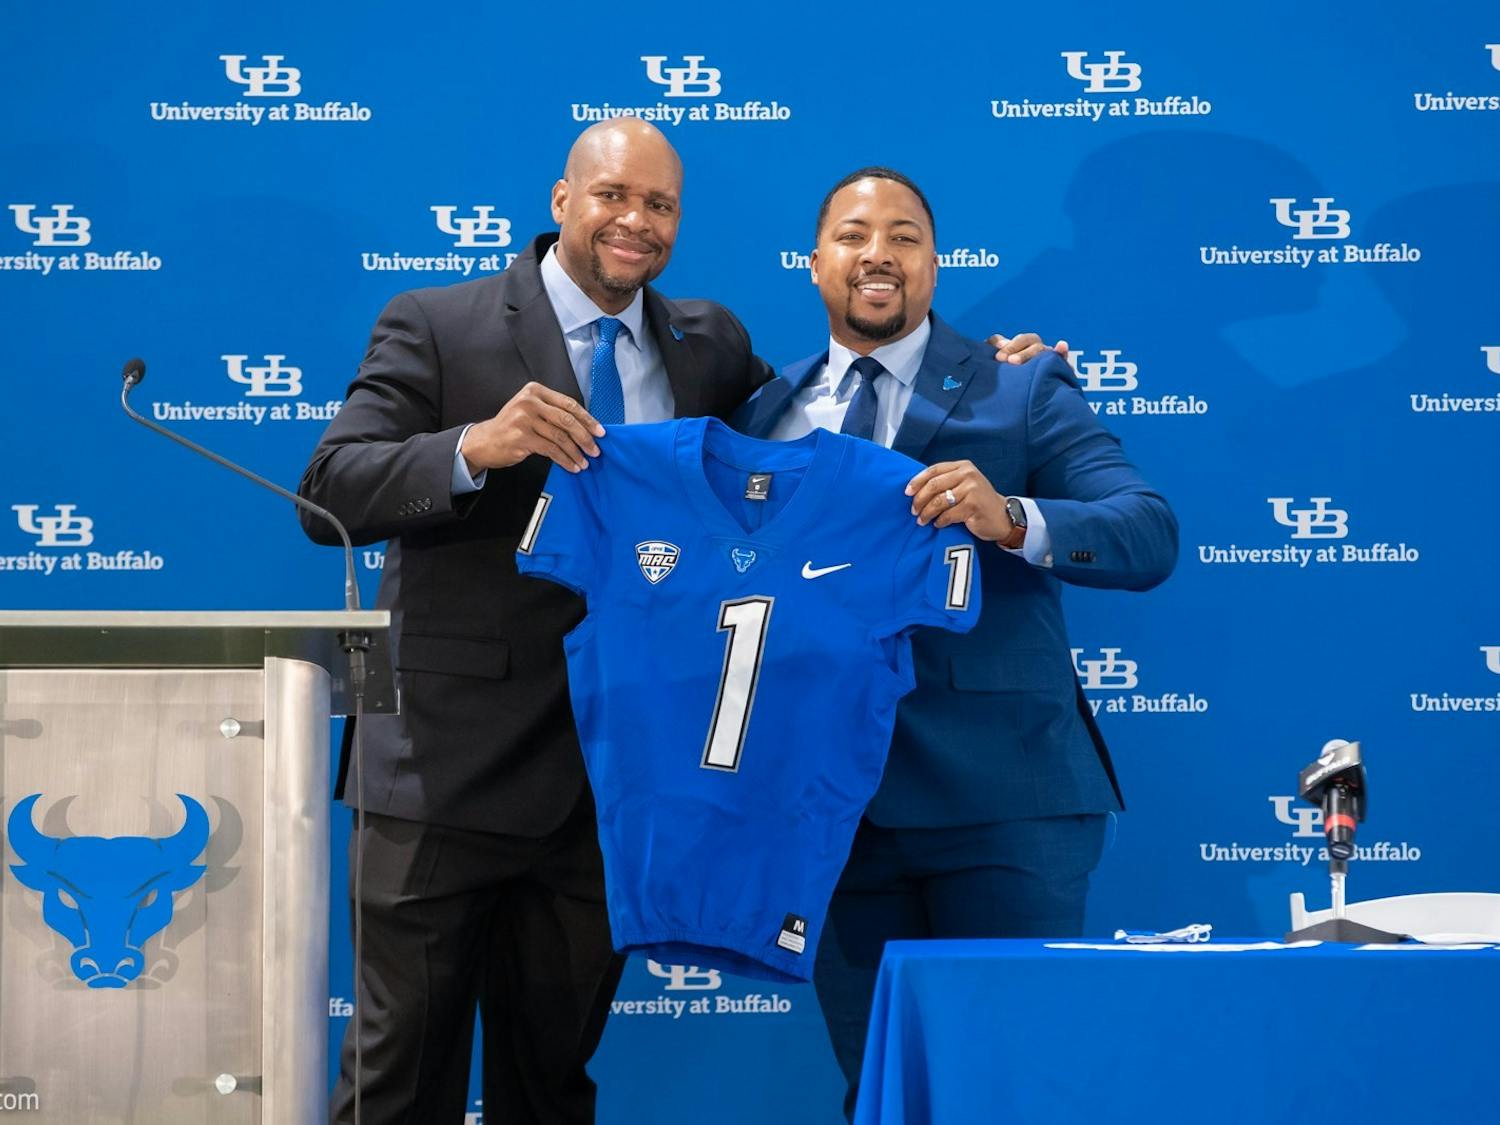 UB football head coach Maurice Linguist's introductory press conference in 2021 | Courtesy of UB Athletics